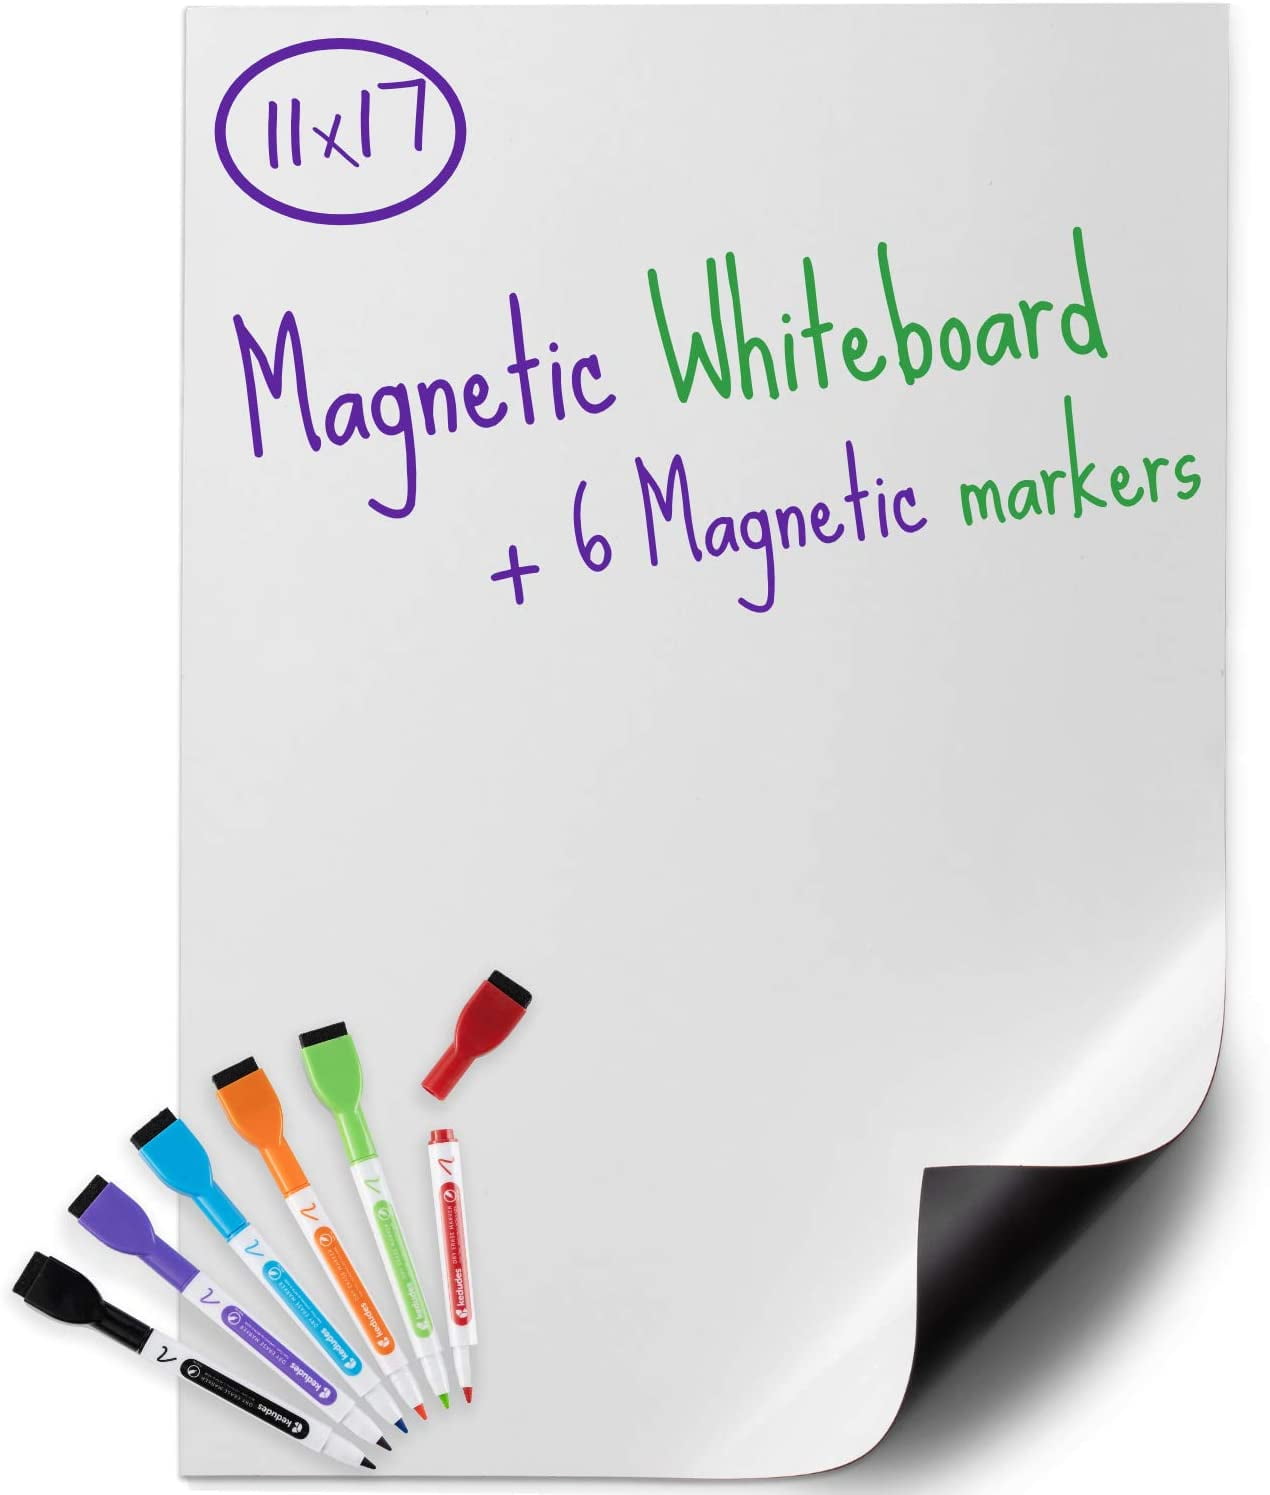 Magnetic Dry Erase Whiteboard Sheet for Kitchen Refrigerator,Stain Resistant Technology Fridge Whiteboard with Magnetic,Refrigerator Whiteboard Organizer and Planner,16 1/2 x 11 3/4 inch